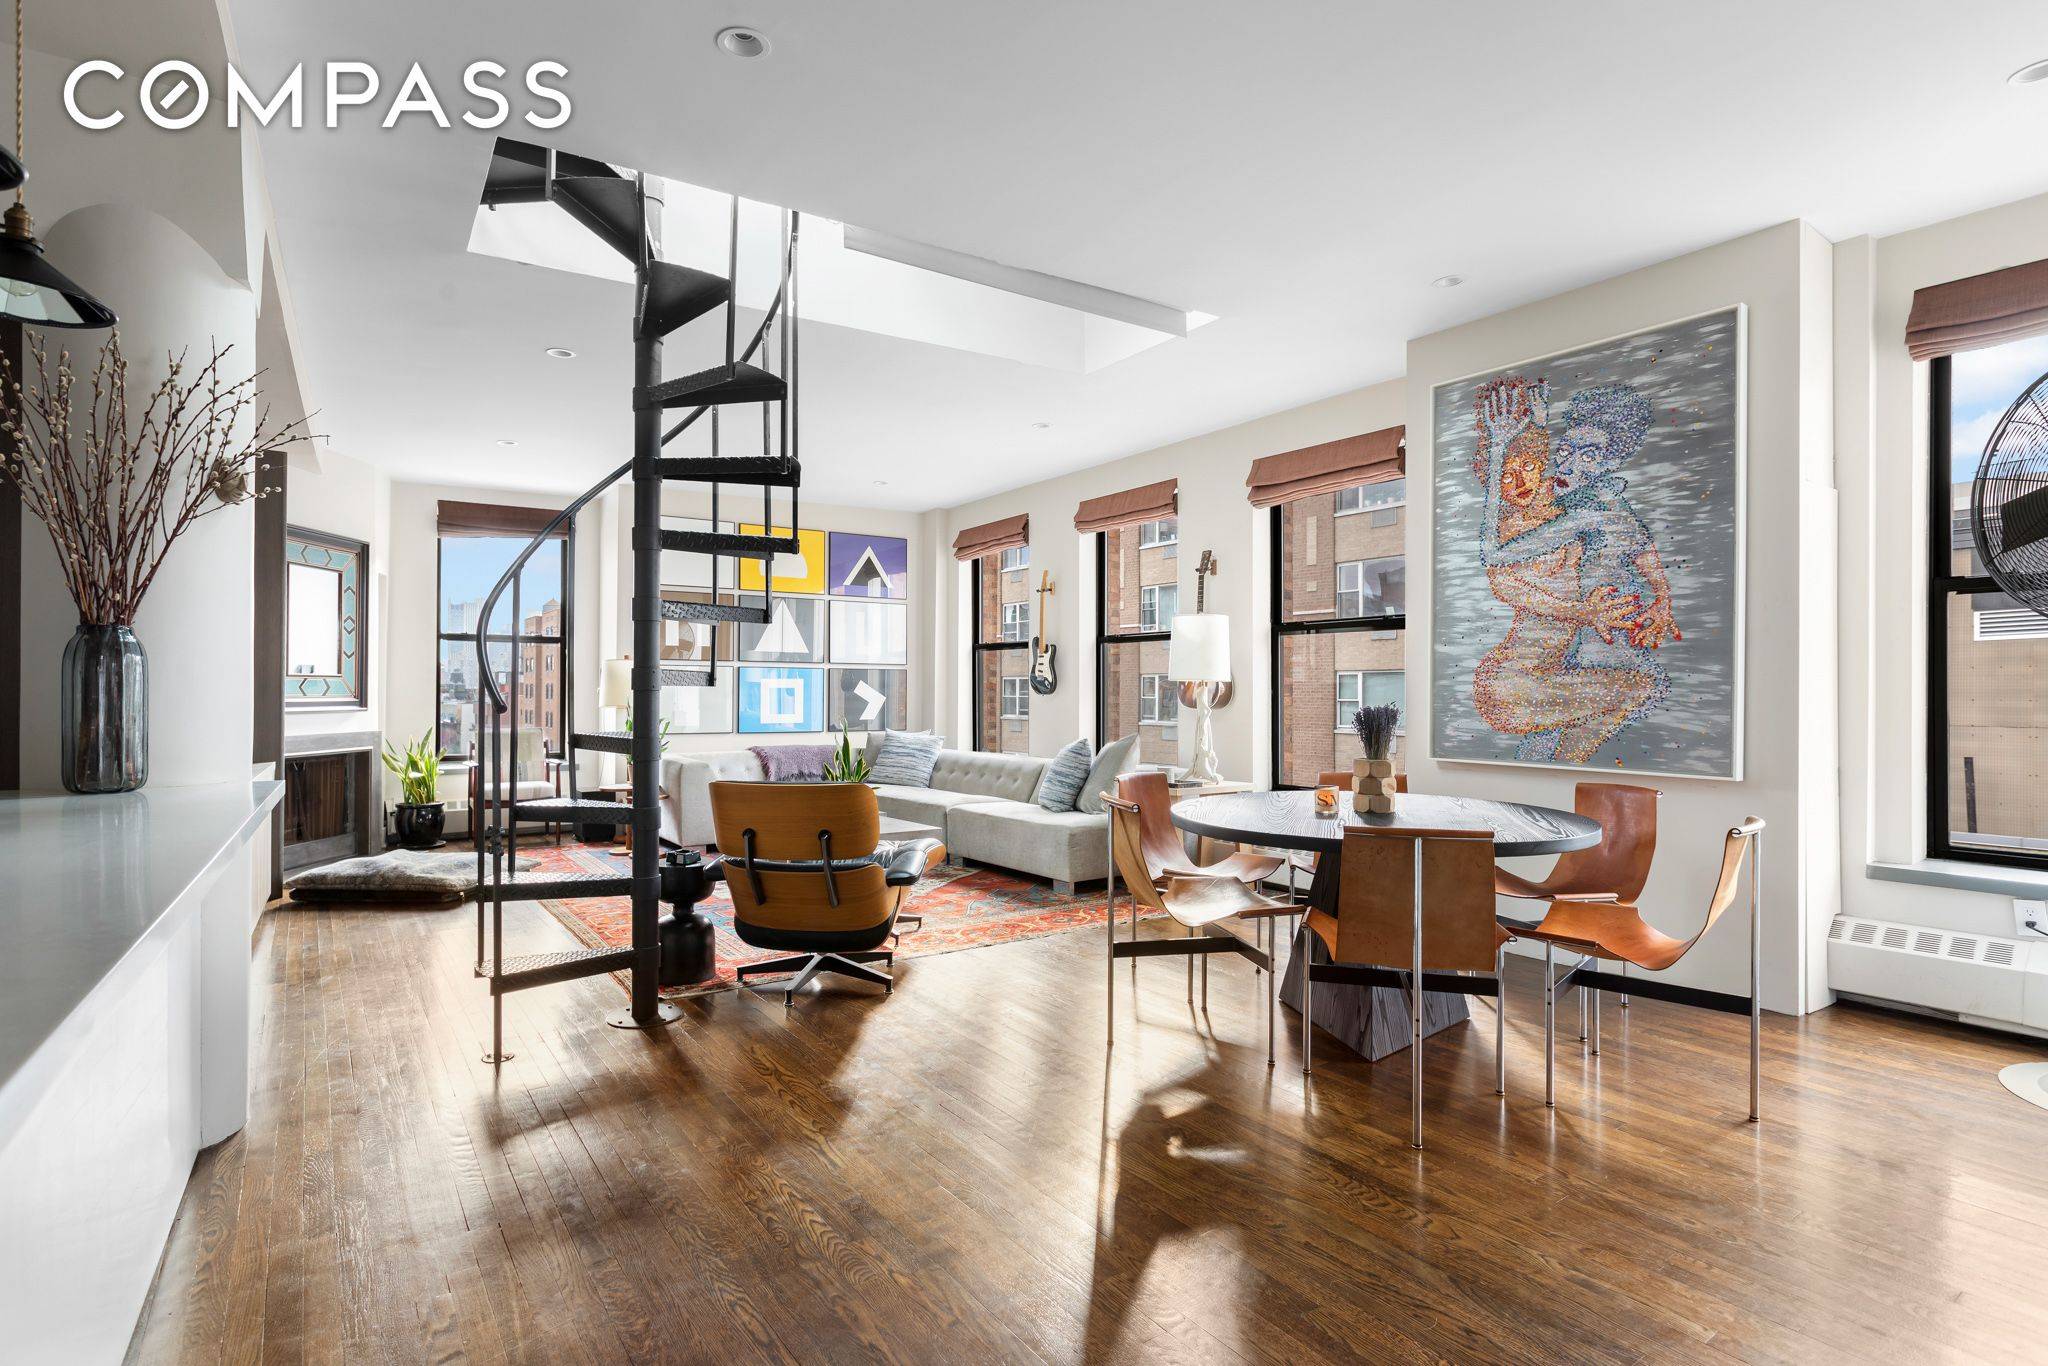 This meticulously designed corner loft penthouse is located in the heart of Noho.